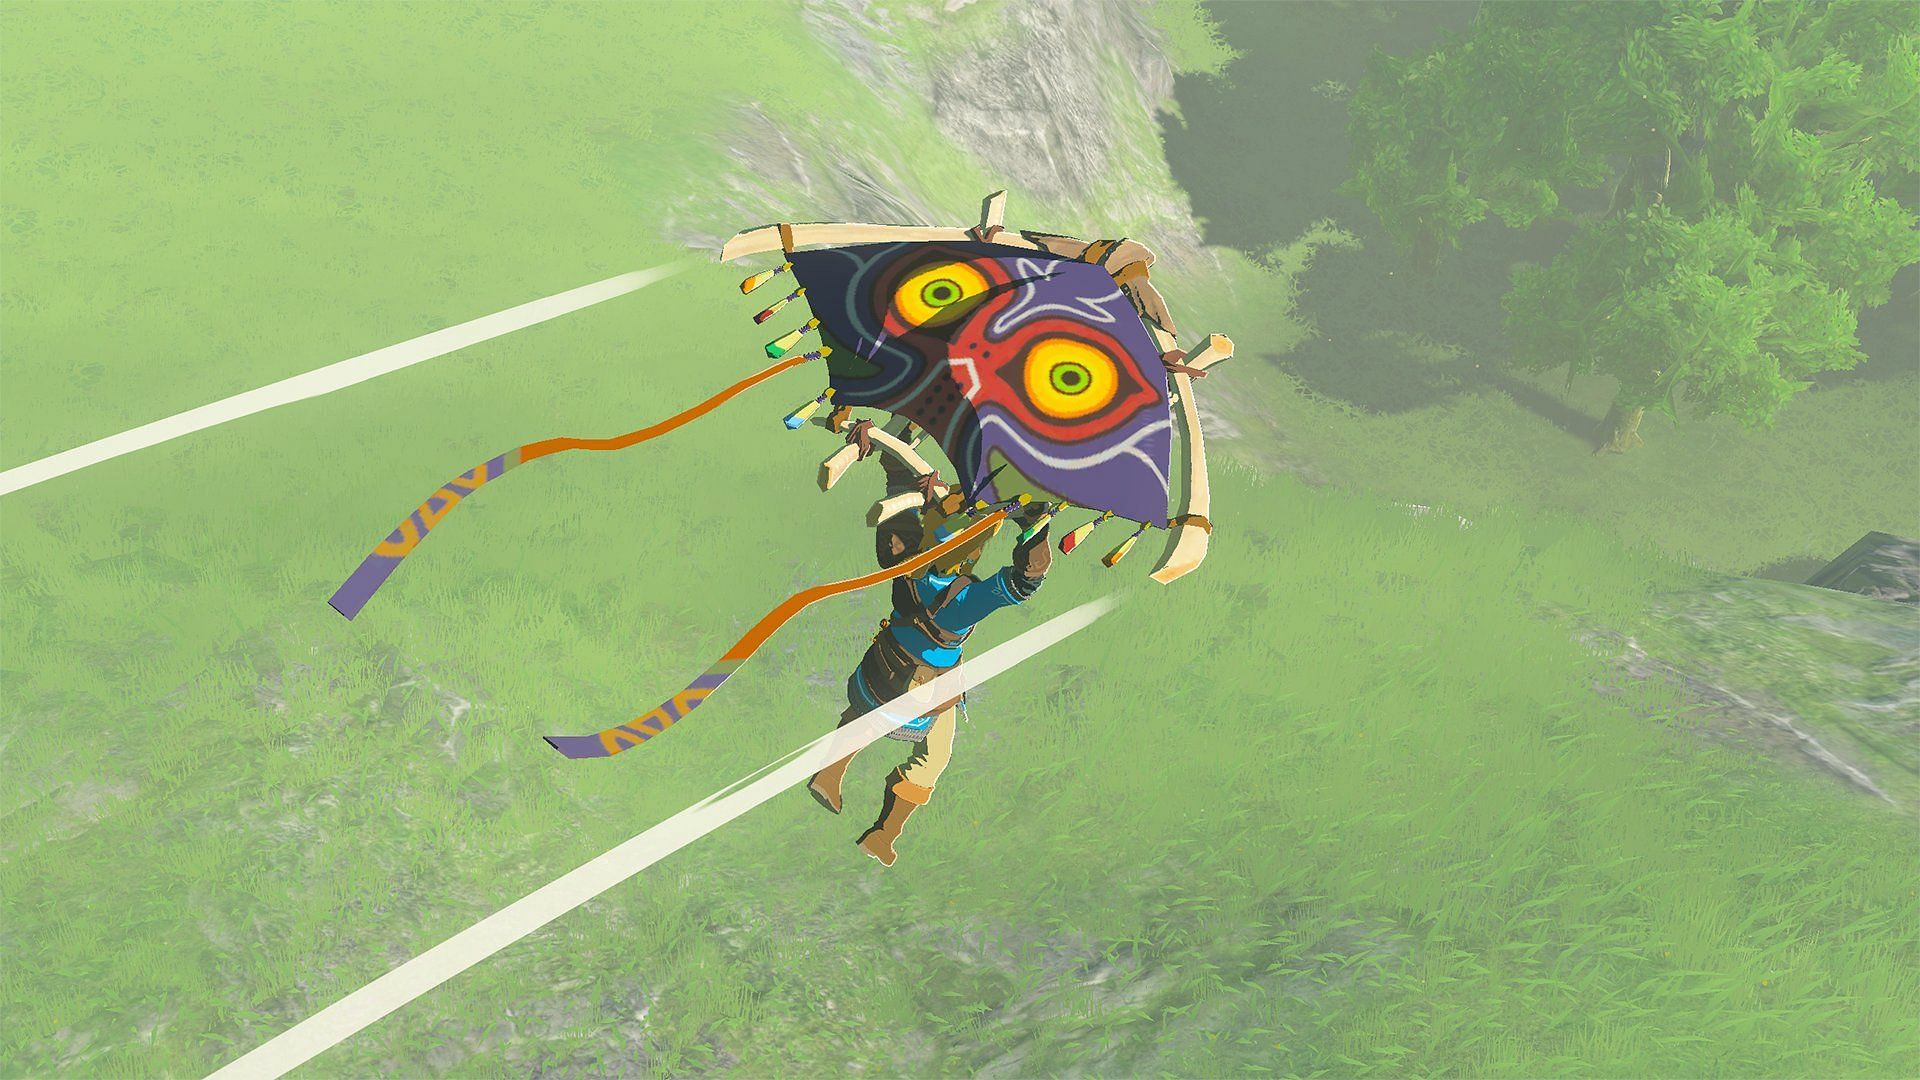 You will get the paraglider from Purah in The Legend of Zelda Tears of the Kingdom (Image via Nintendo)